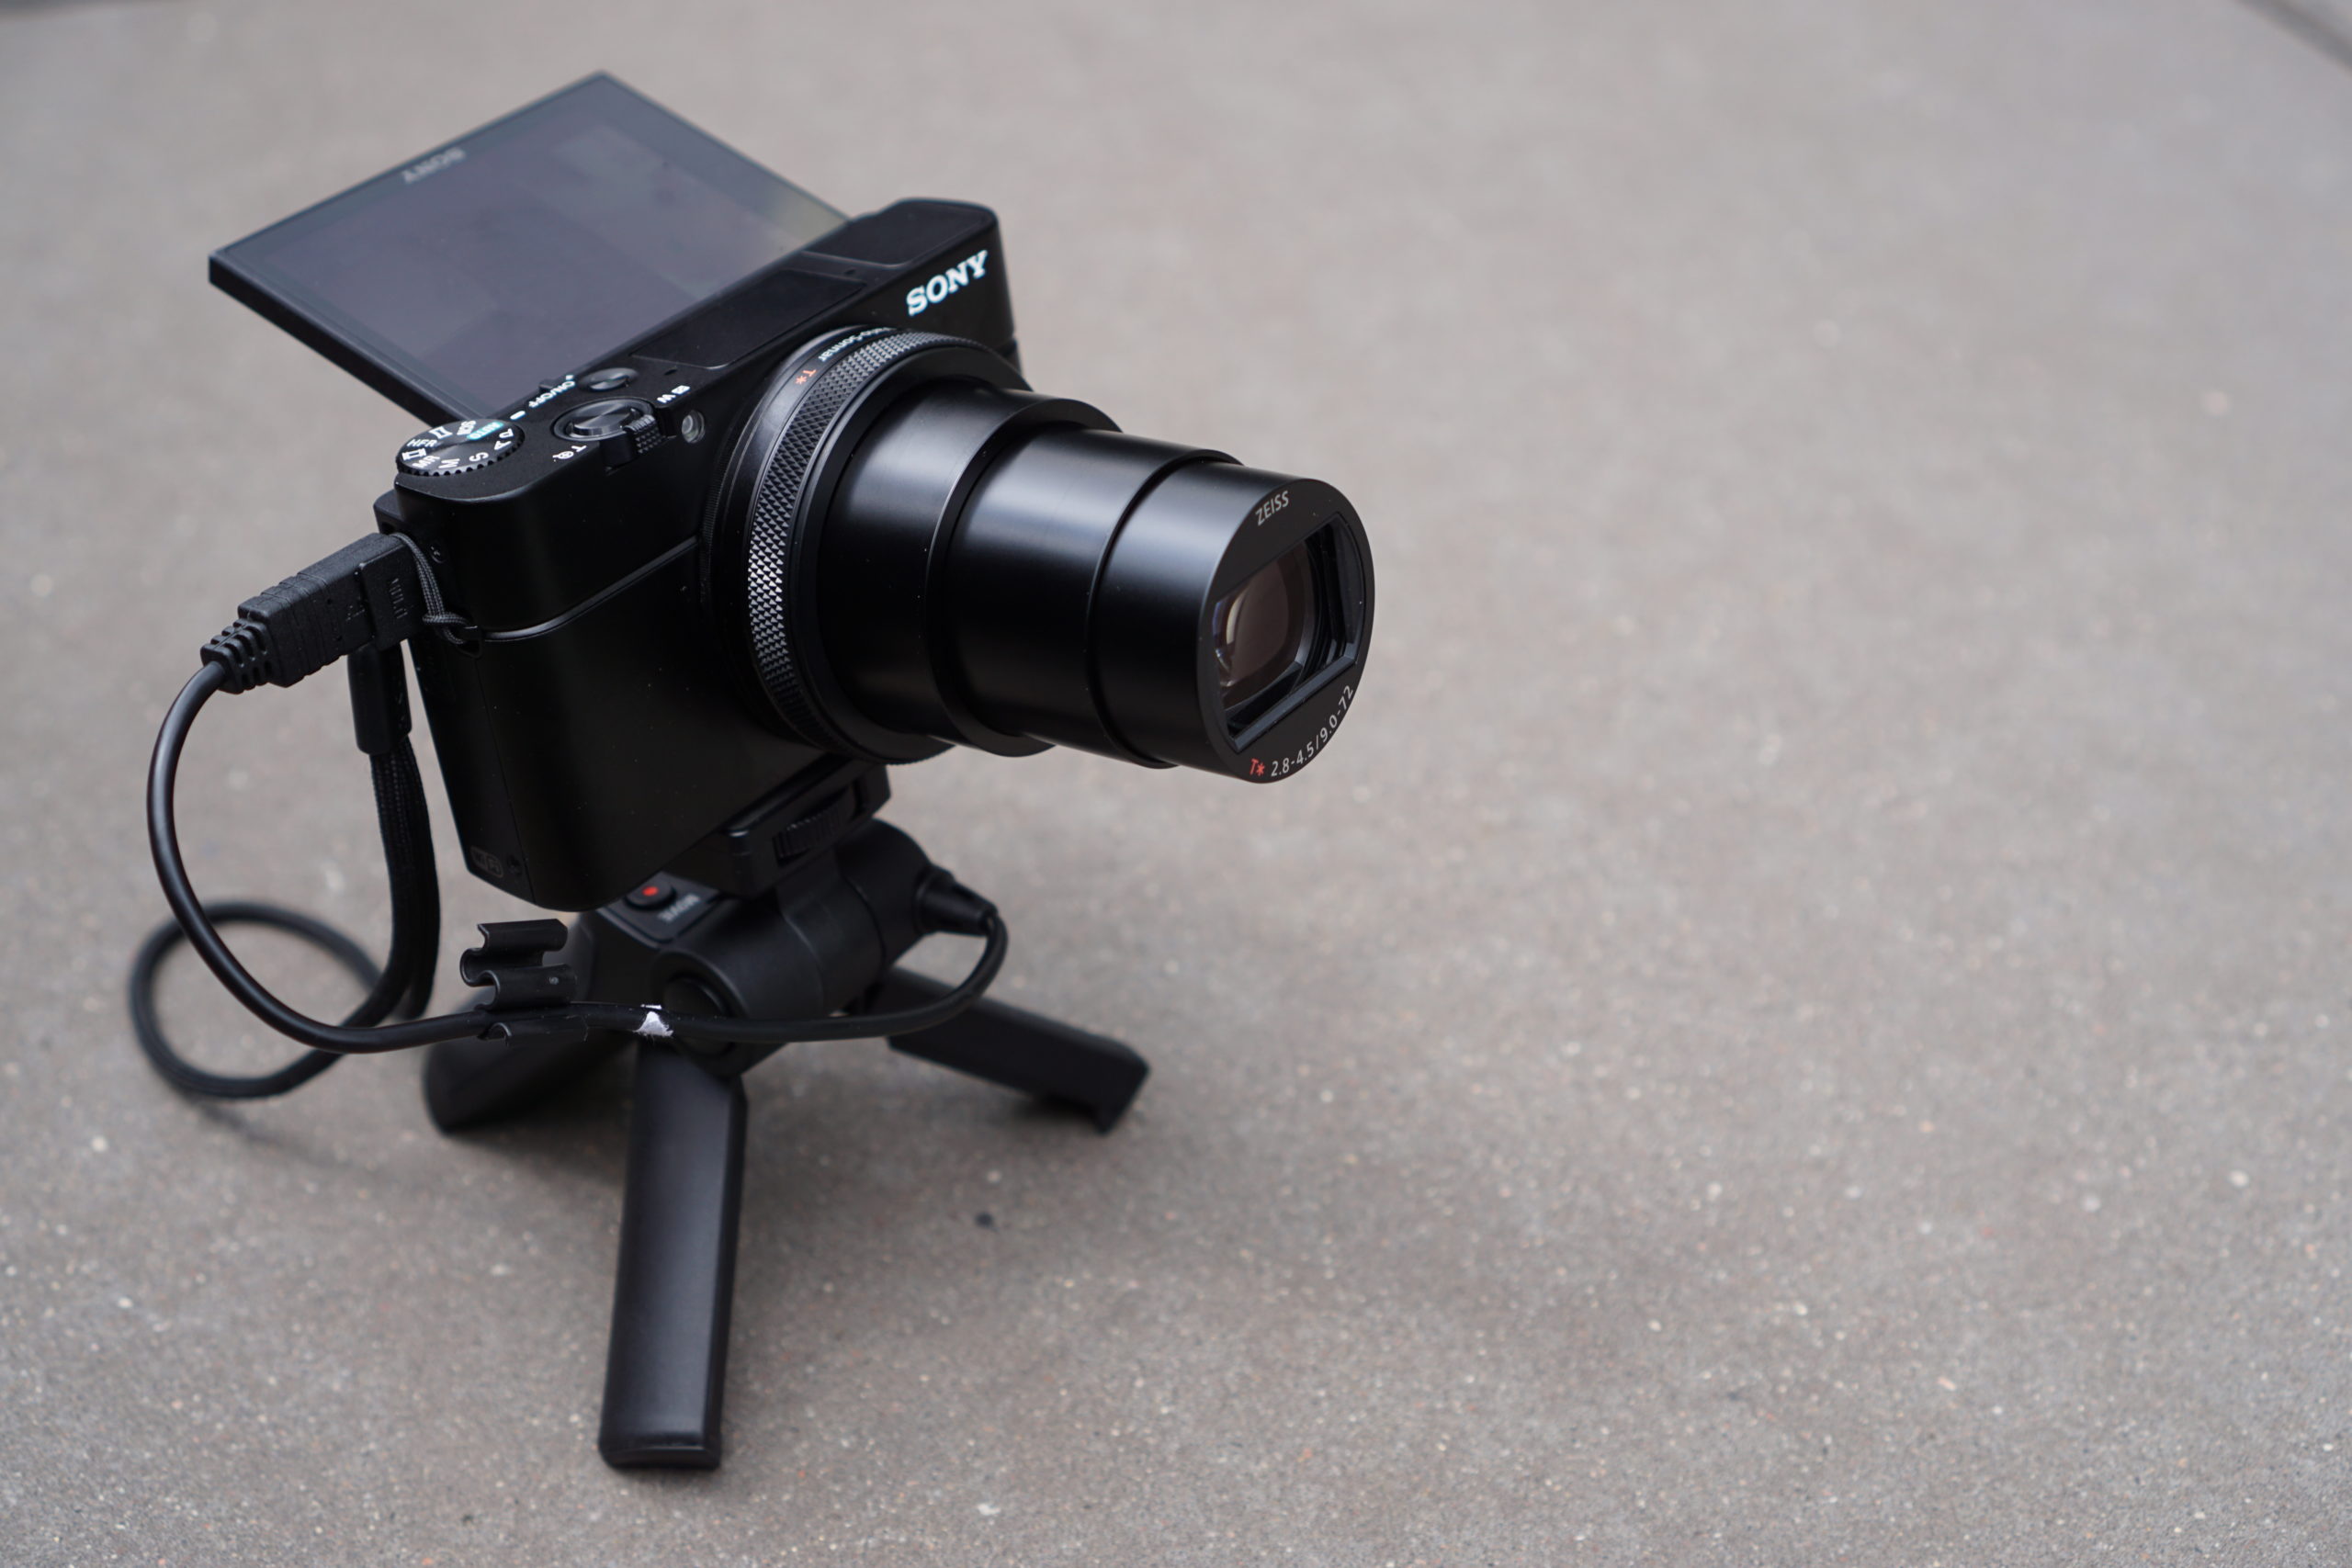 Two Hours With Sony’s New RX100 VI Made Me Miss My Point And Shoot